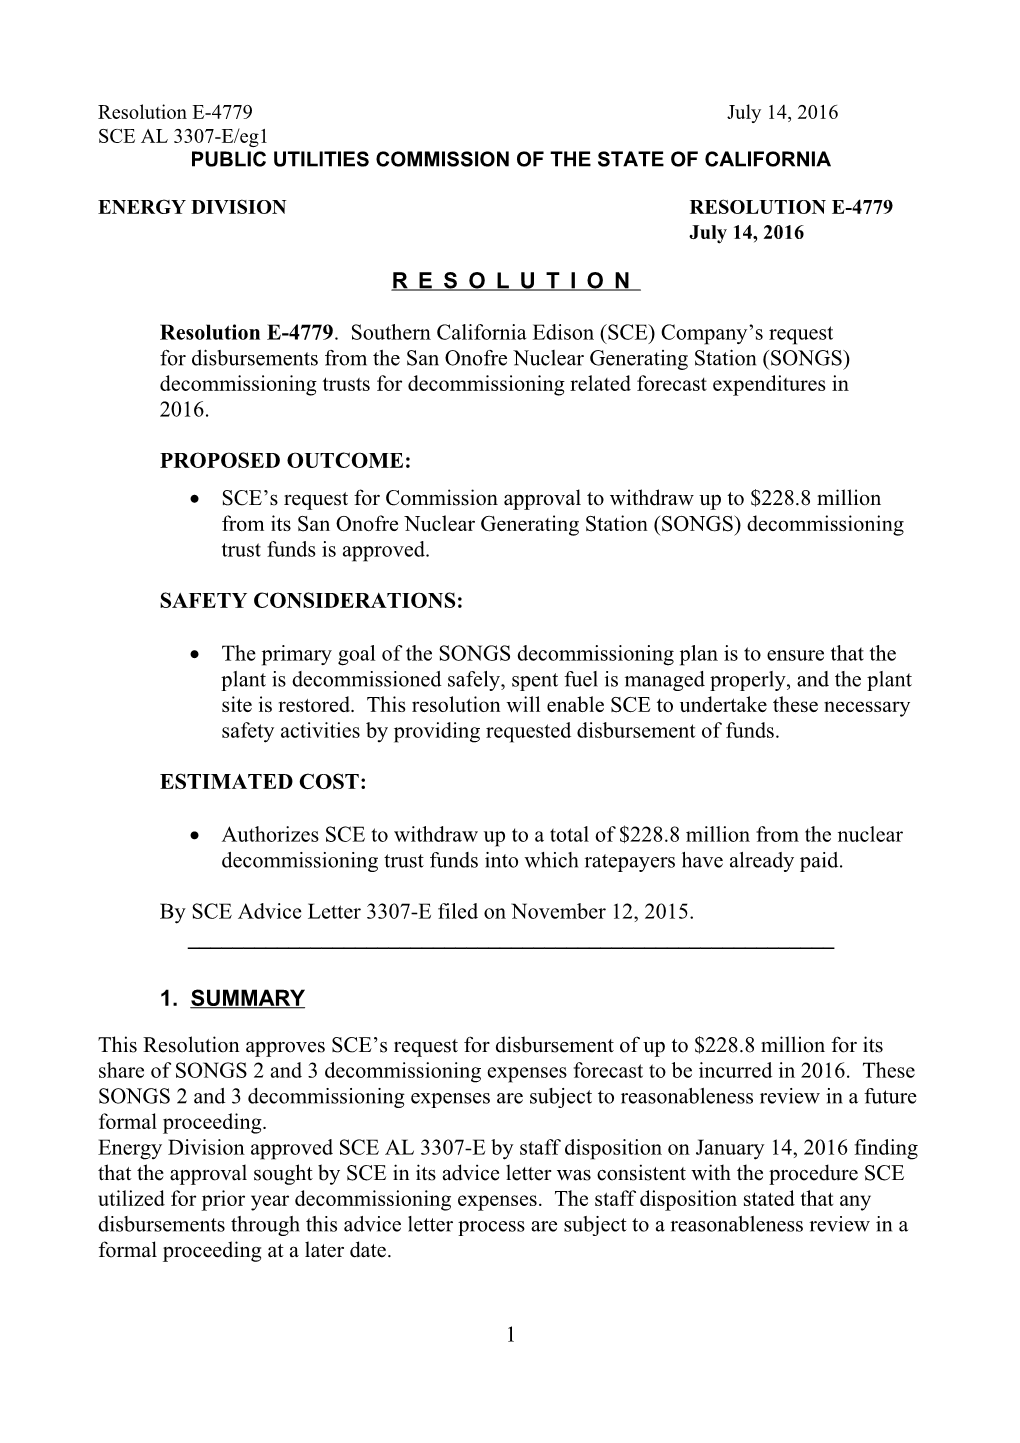 Public Utilities Commission of the State of California s119